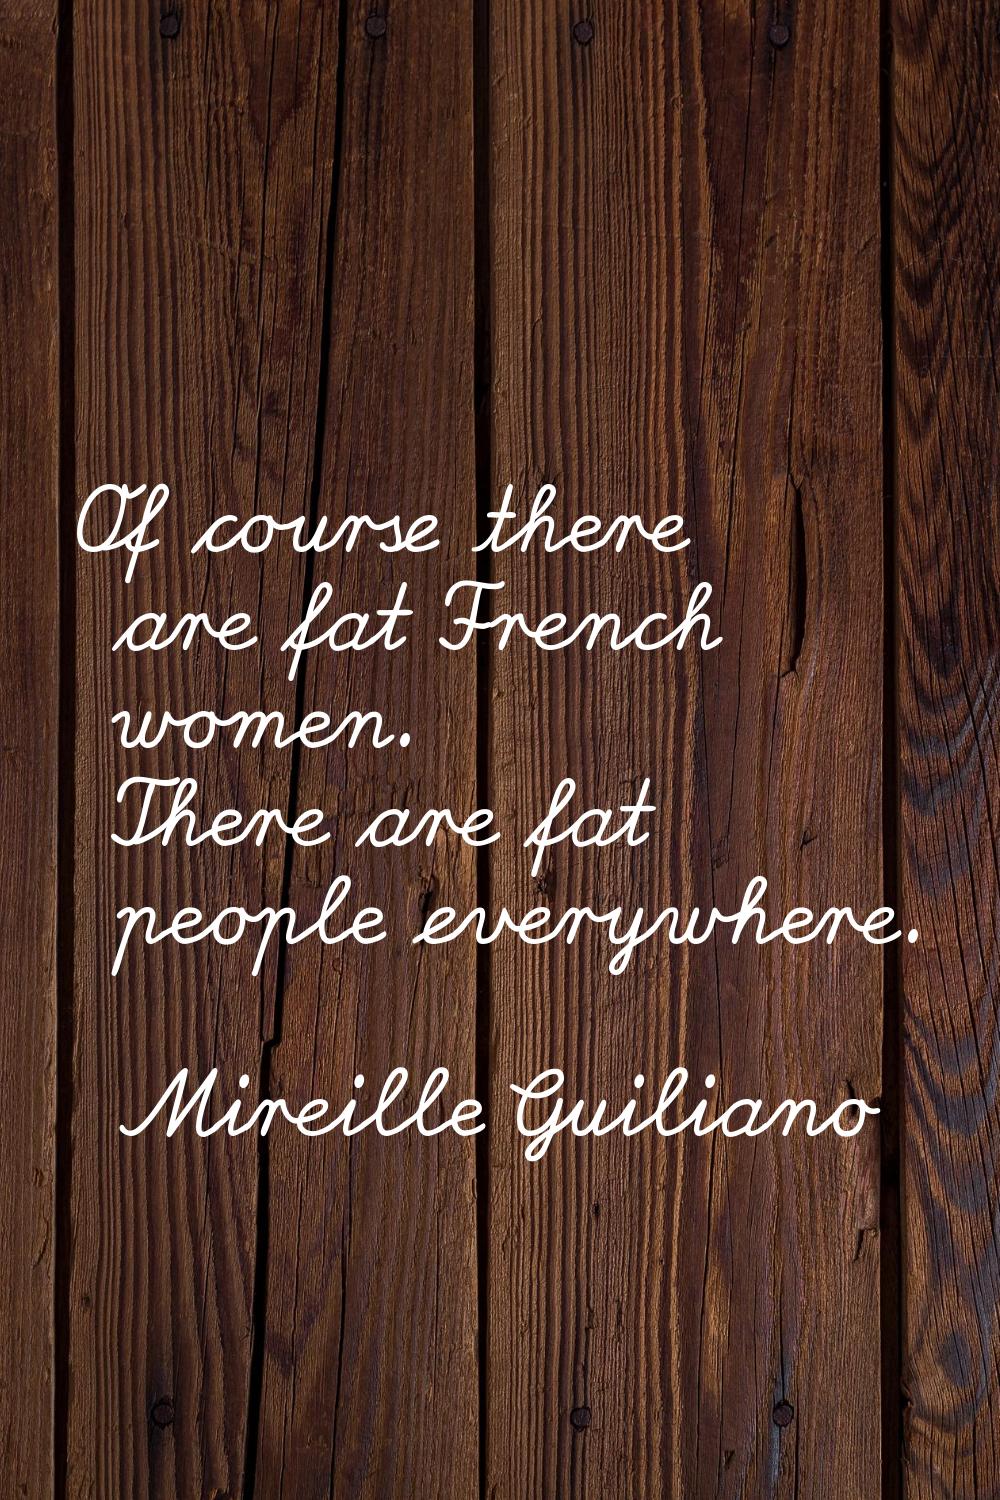 Of course there are fat French women. There are fat people everywhere.